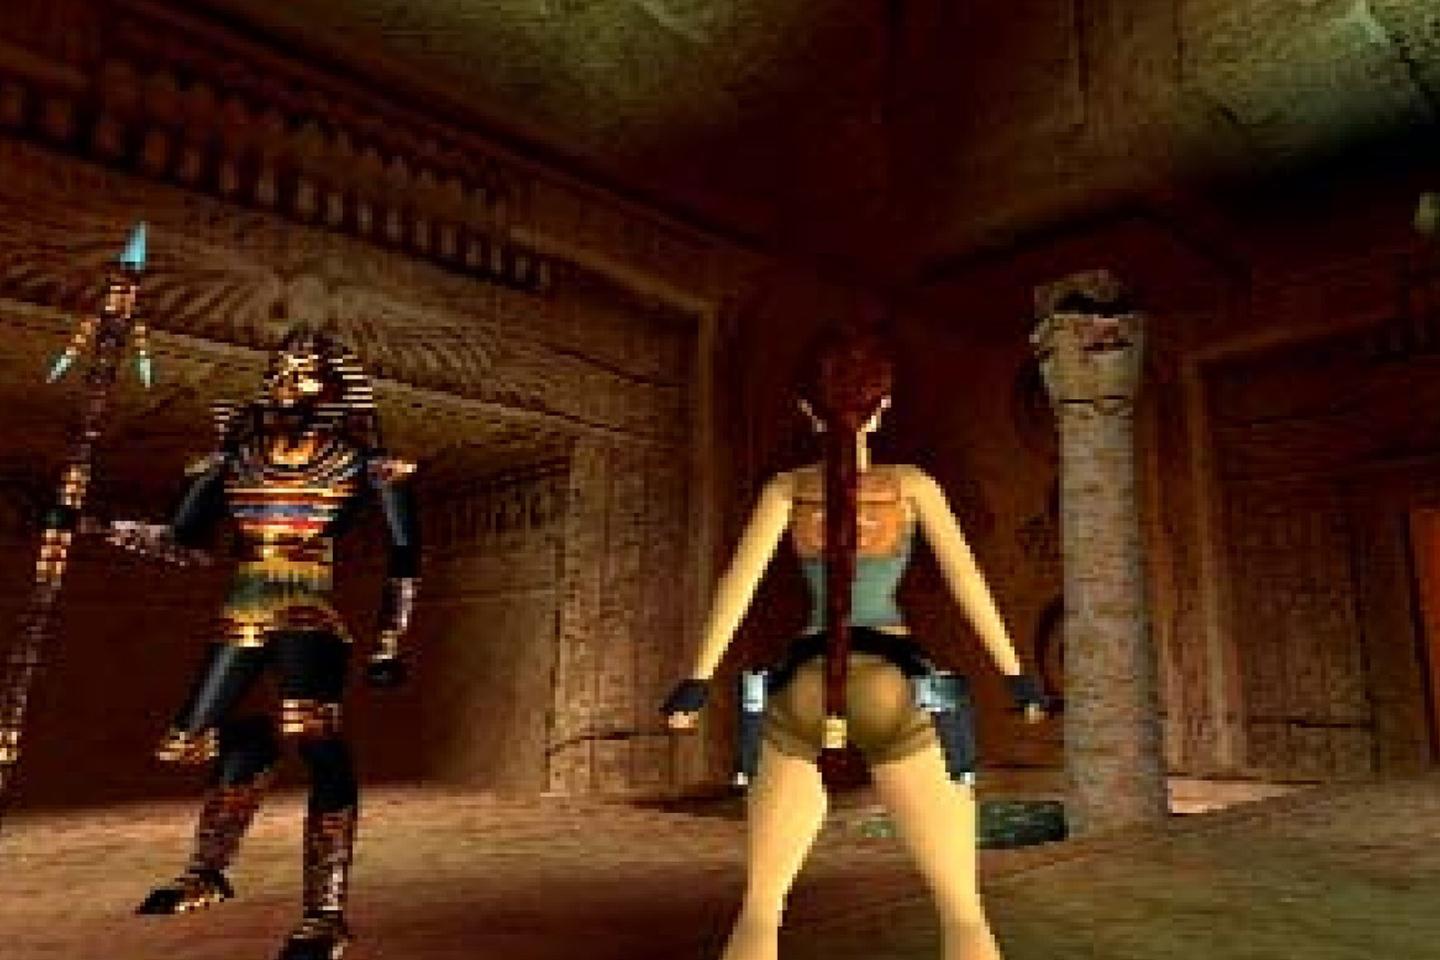 Lara standing near tomb guardian holding large spear and wearing colorful Egyptian print.